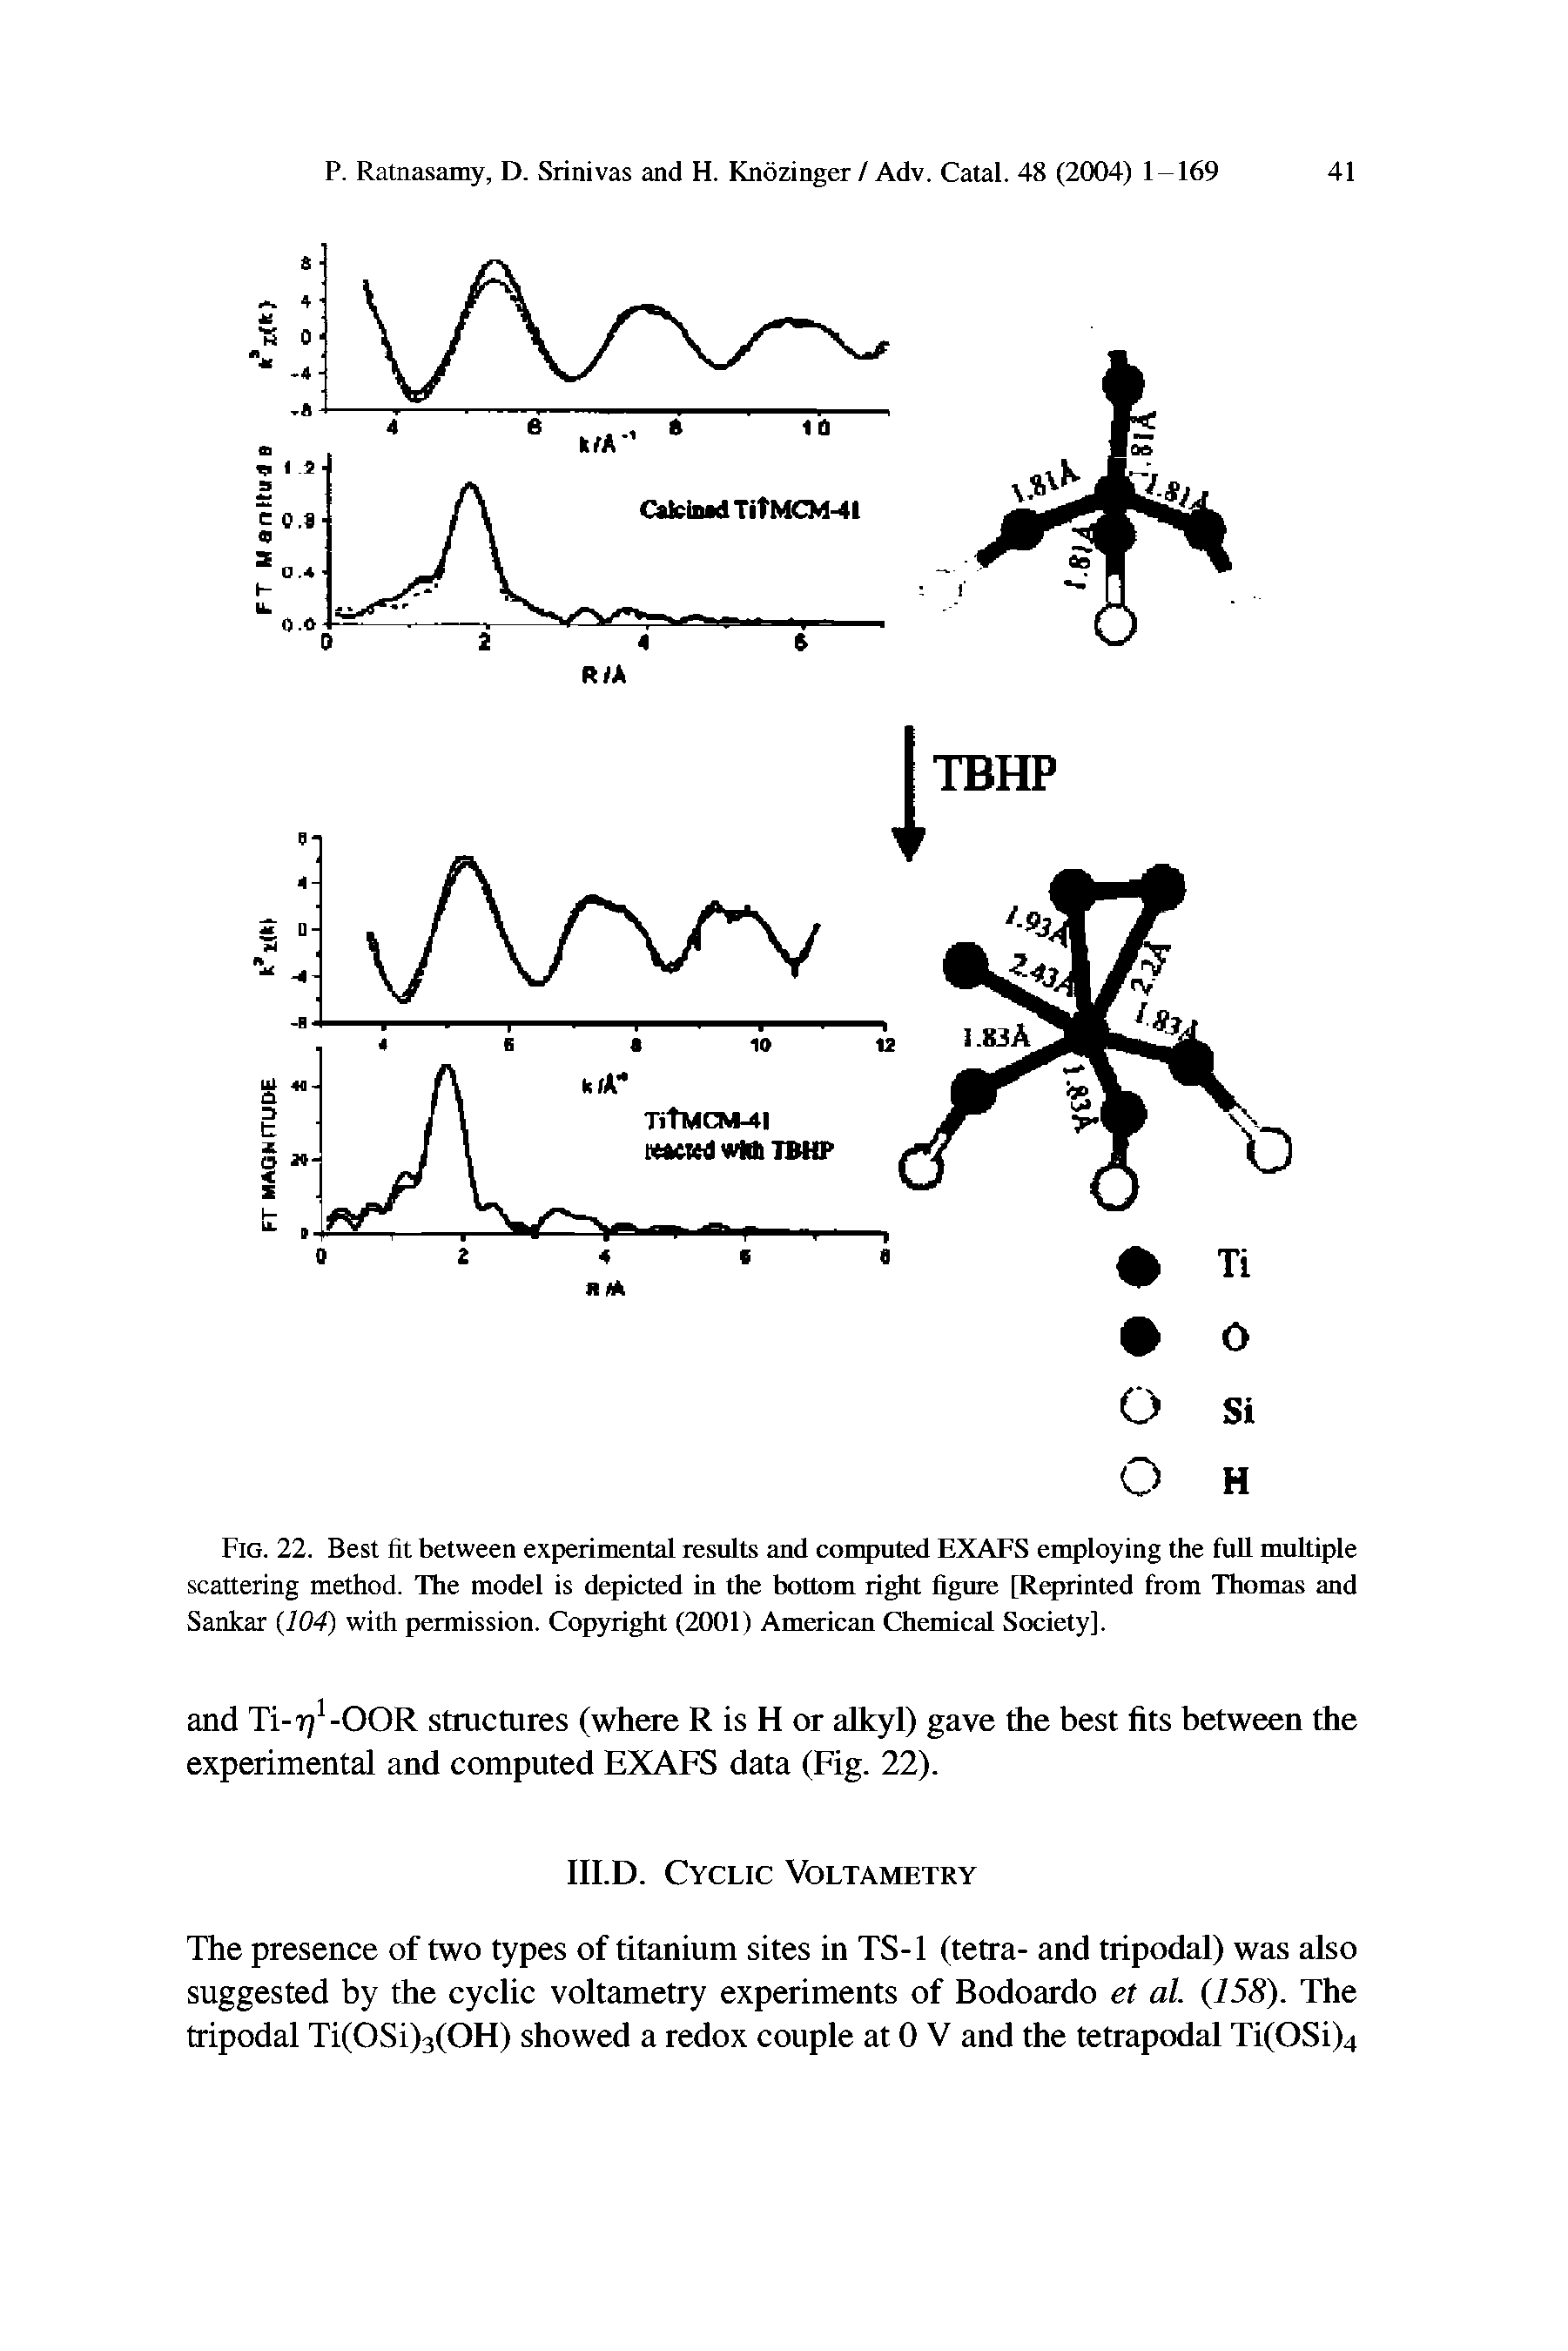 Fig. 22. Best fit between experimental results and computed EXAFS employing the full multiple scattering method. The model is depicted in the bottom right figure [Reprinted from Thomas and Sankar (104) with permission. Copyright (2001) American Chemical Society].